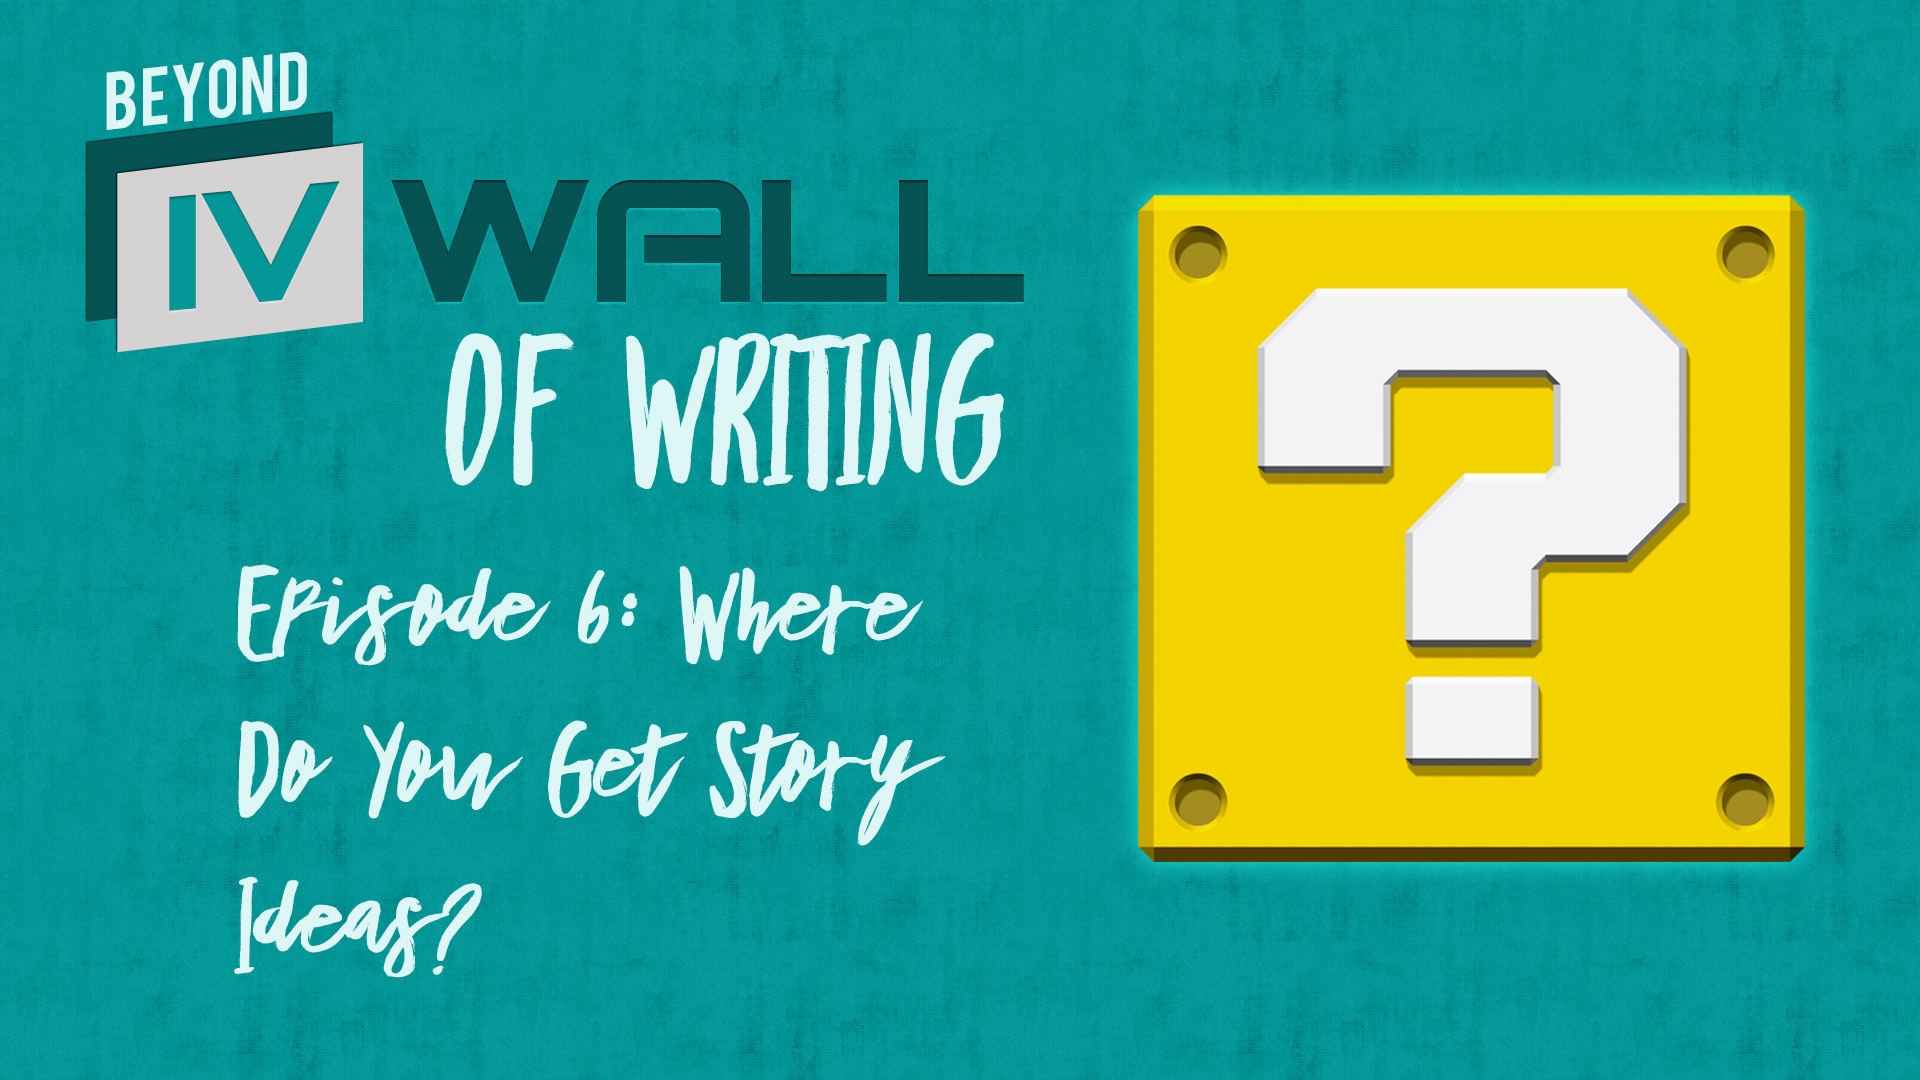 Beyond the IVWall of Writing: Episode 6- Where Do You Get Story Ideas?